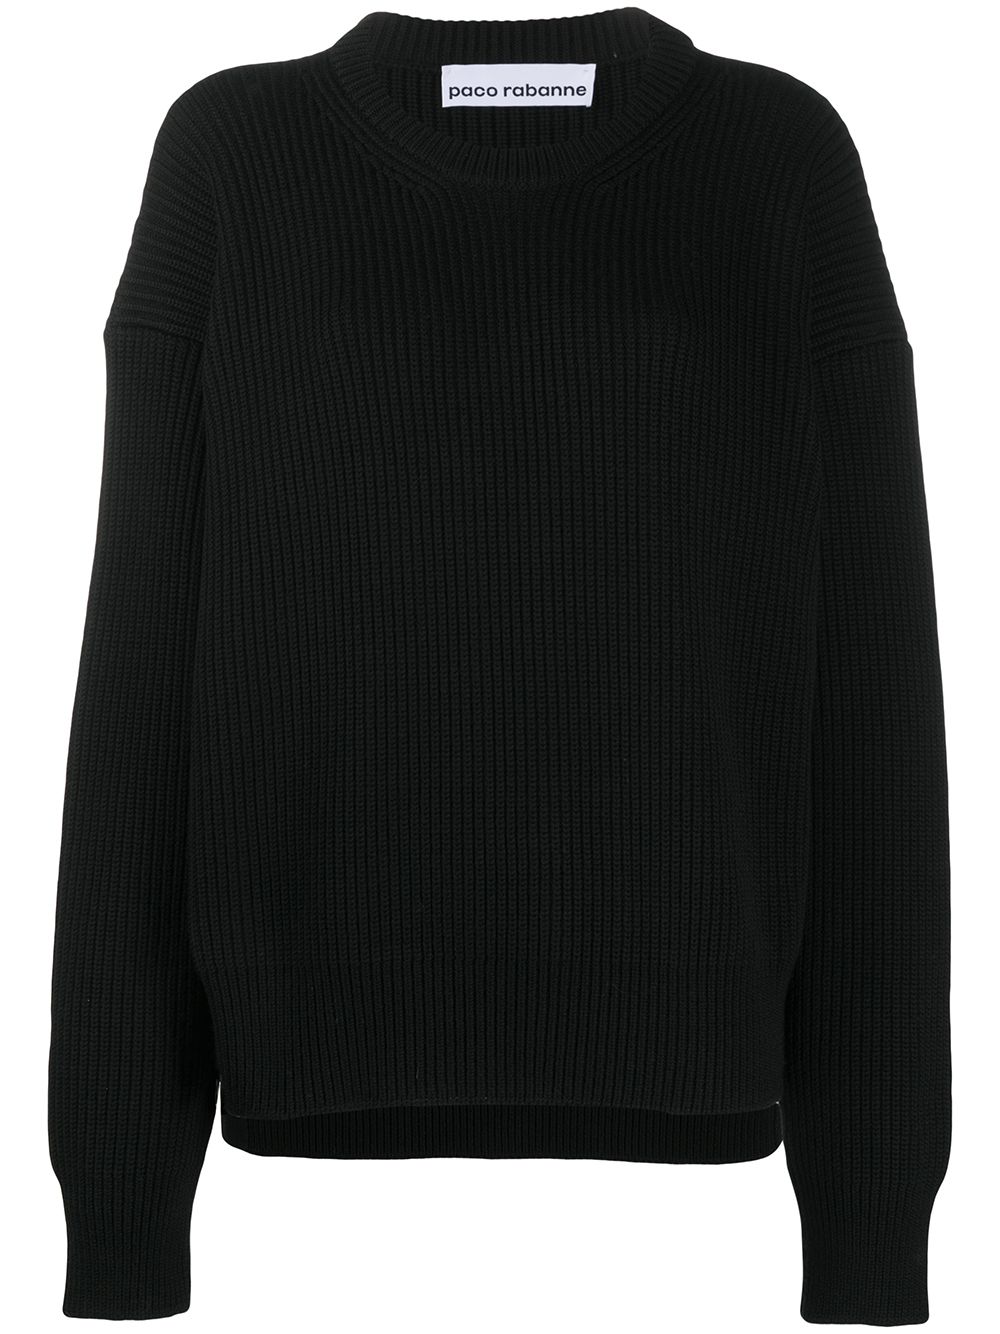 Paco Rabanne oversized cable knit jumper - FARFETCH